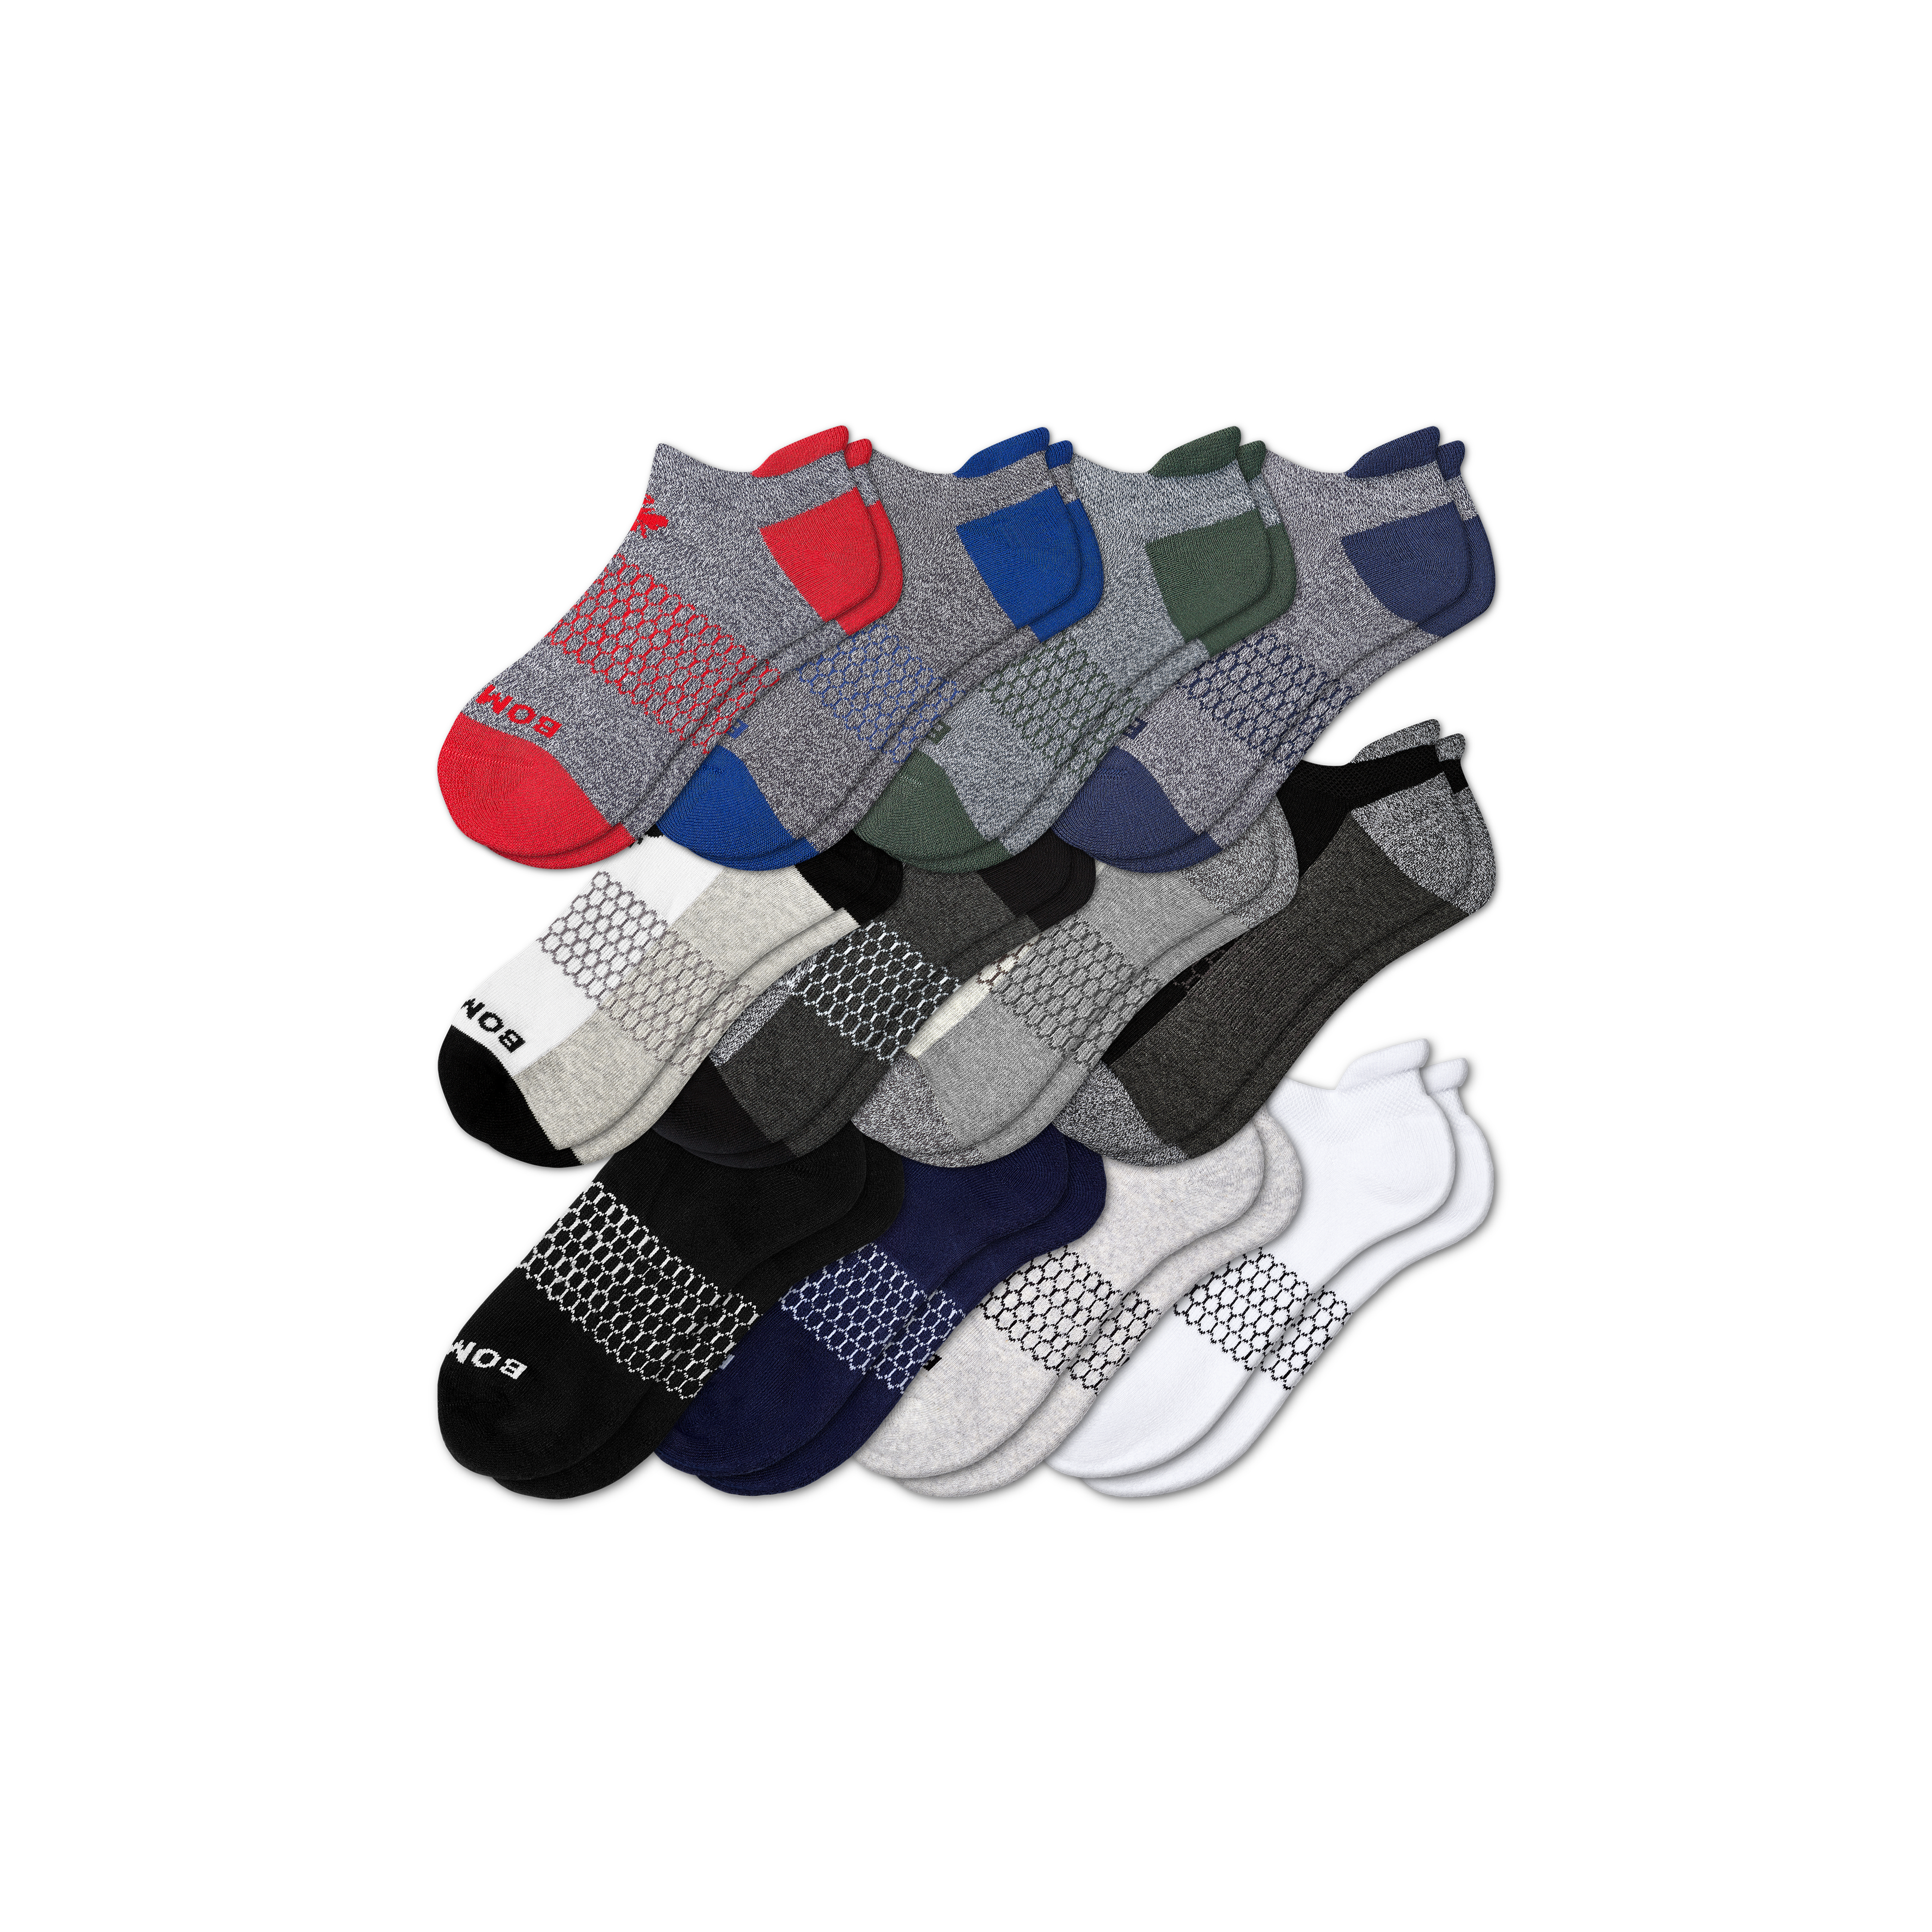 Bombas Ankle Sock 12-pack In Originals Solids Mix